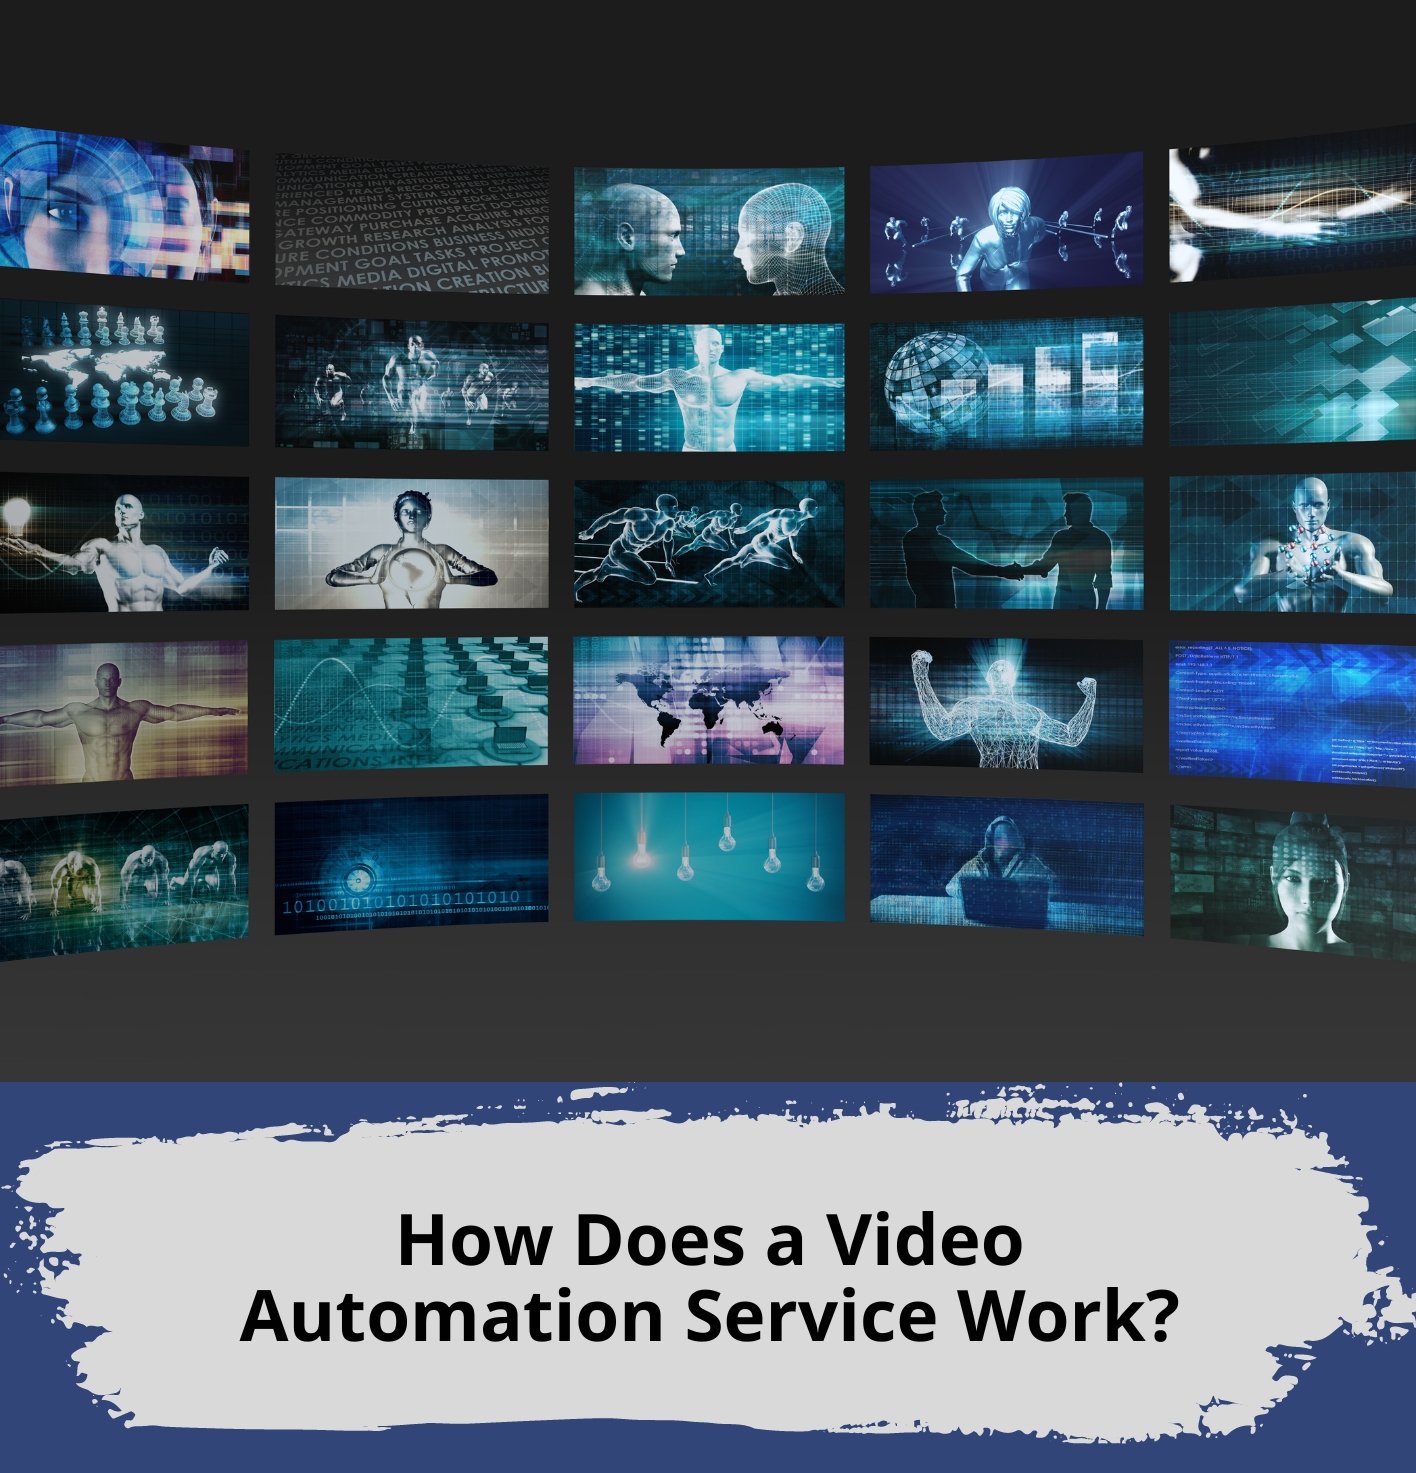 How Does a Video Automation Service Work?